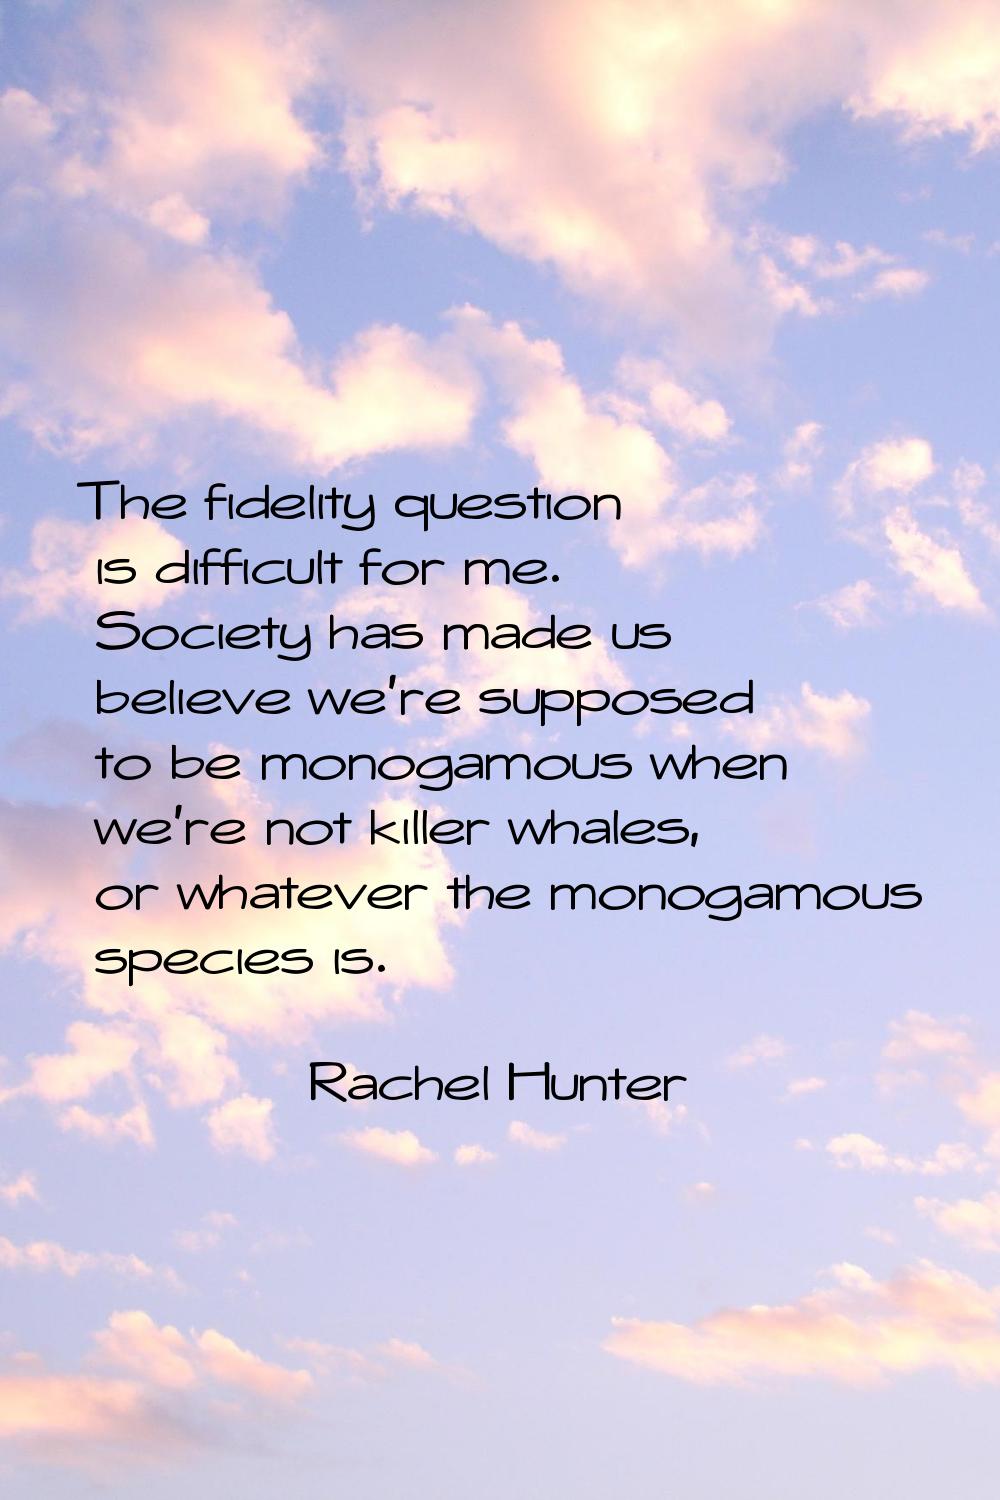 The fidelity question is difficult for me. Society has made us believe we're supposed to be monogam